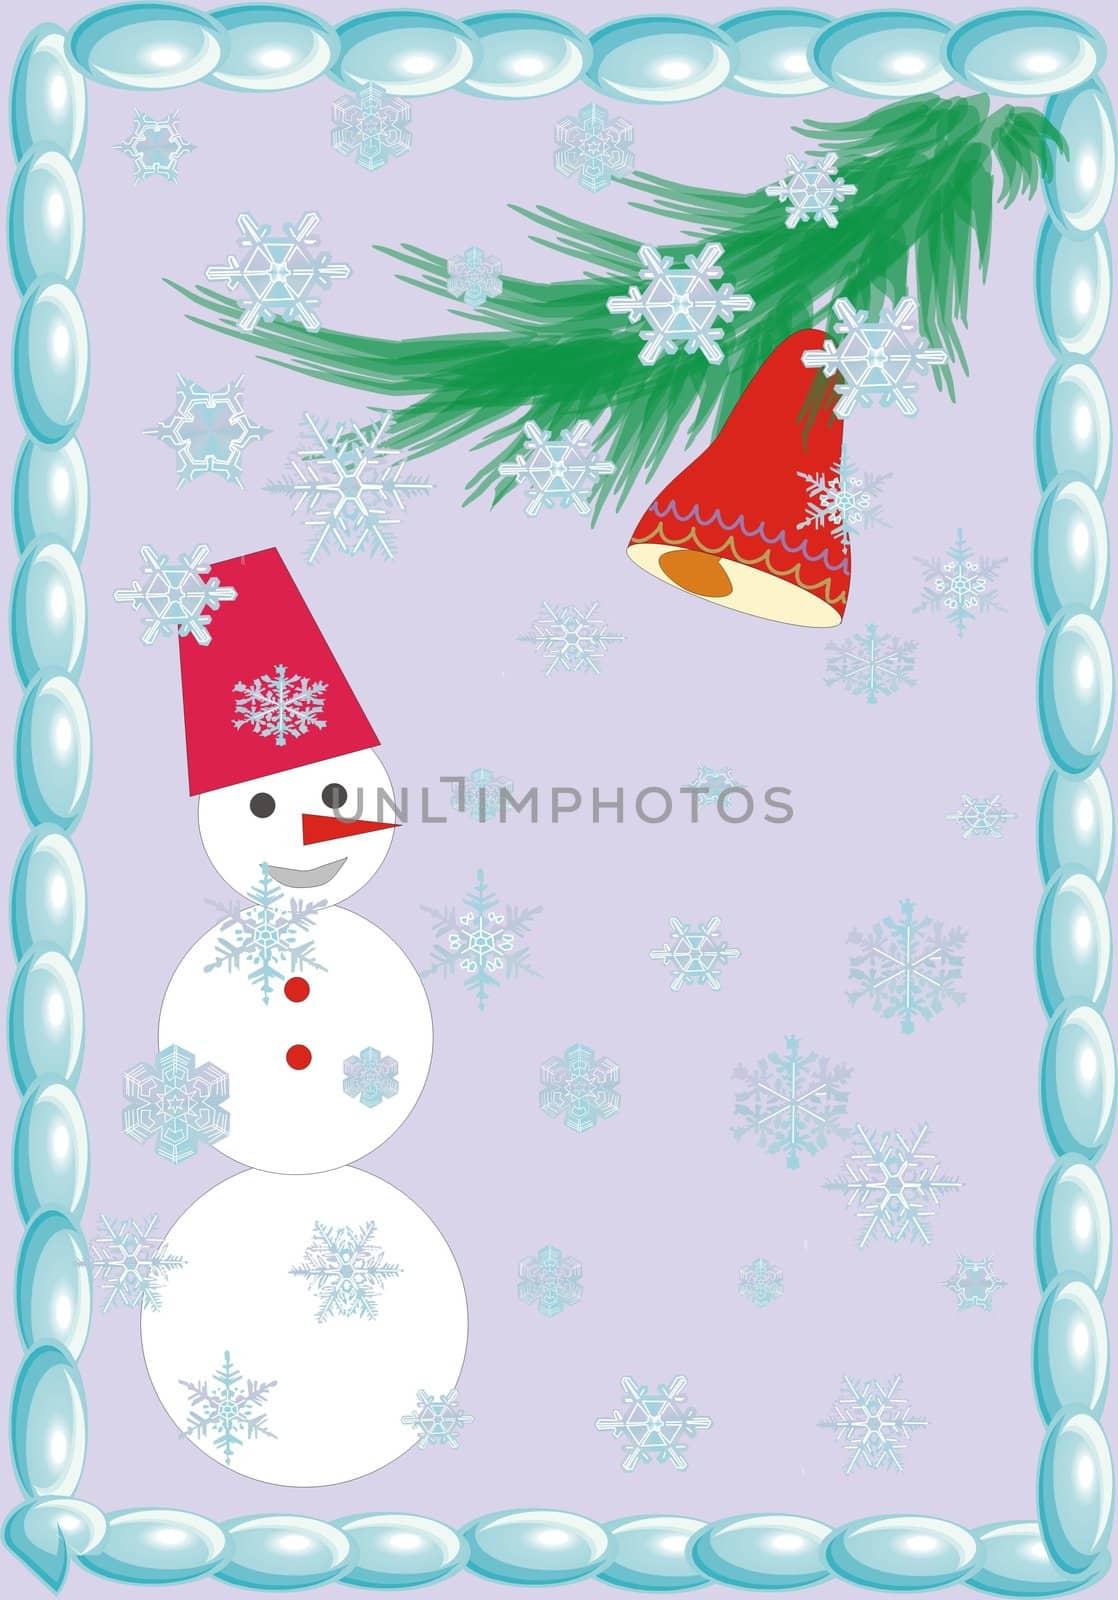 snowman at the christmas on the violet background with a bell